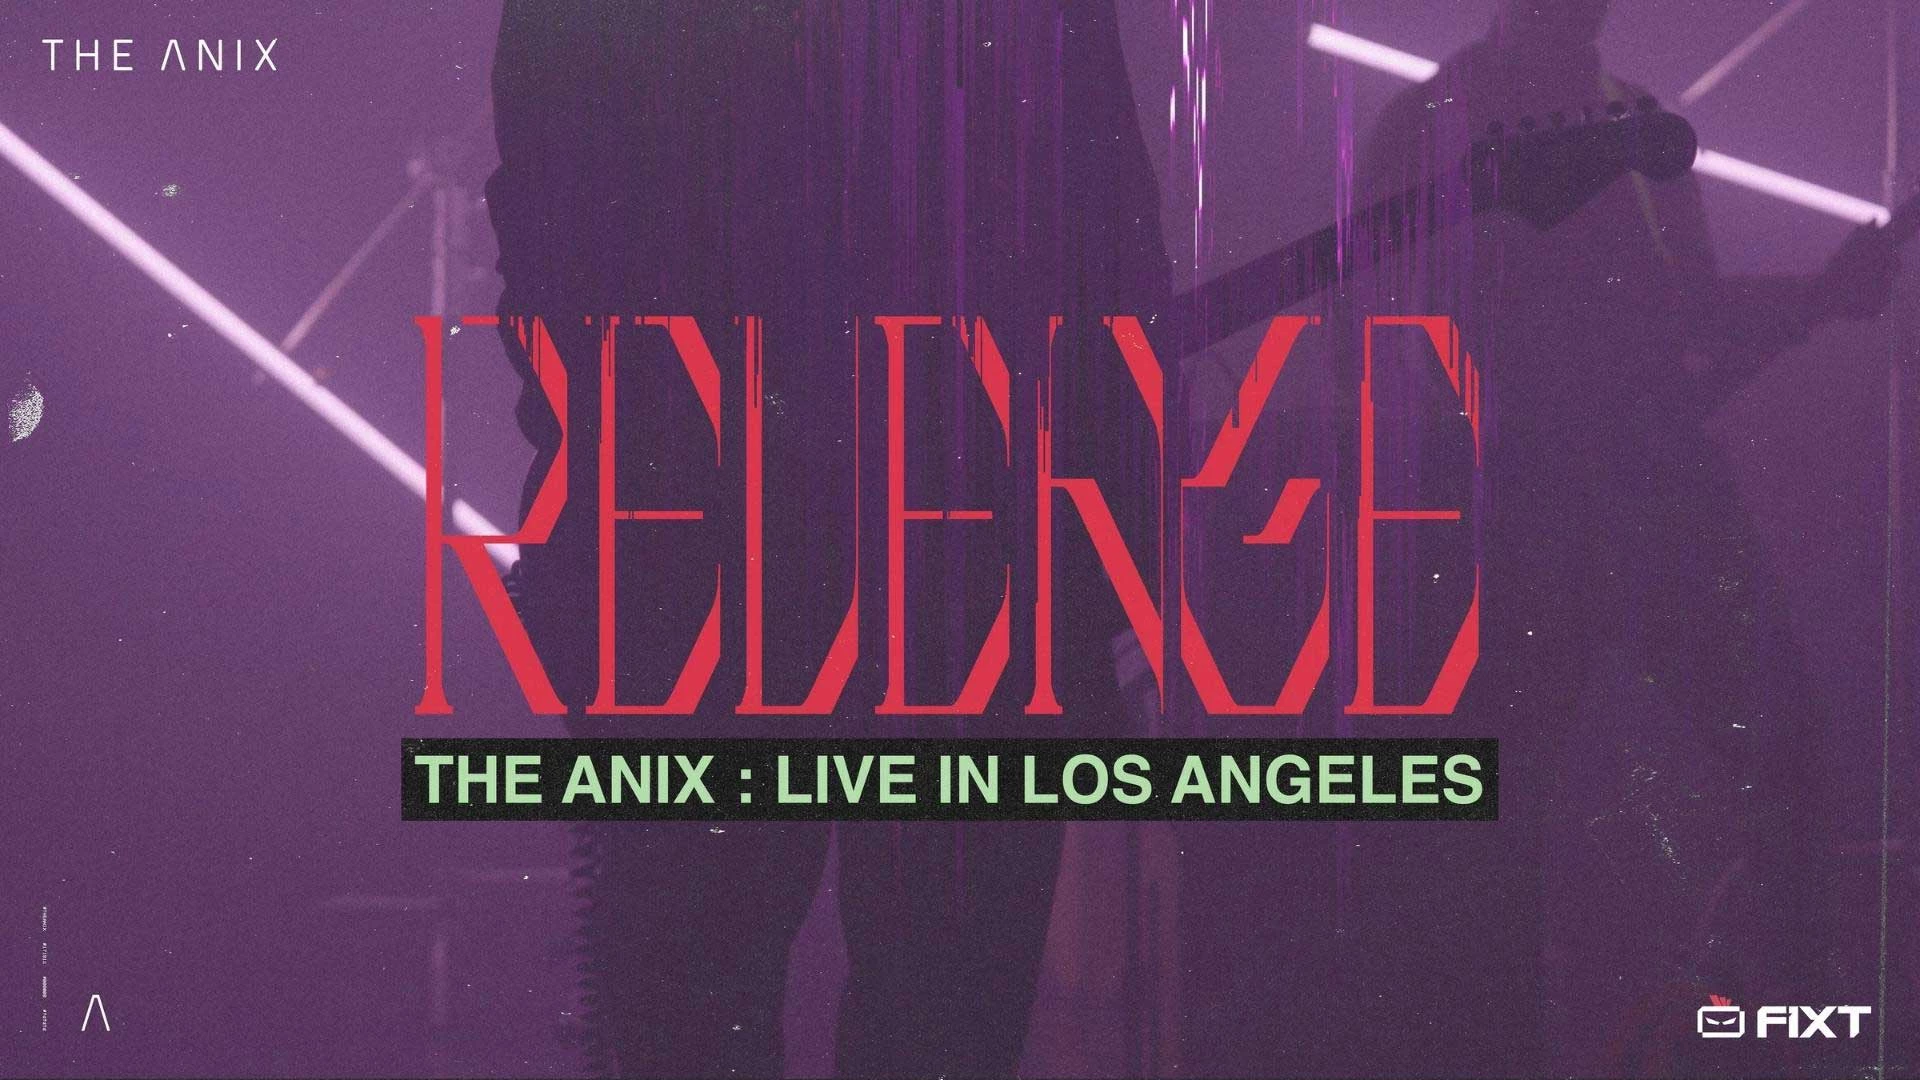 The Anix: Live In Los Angeles